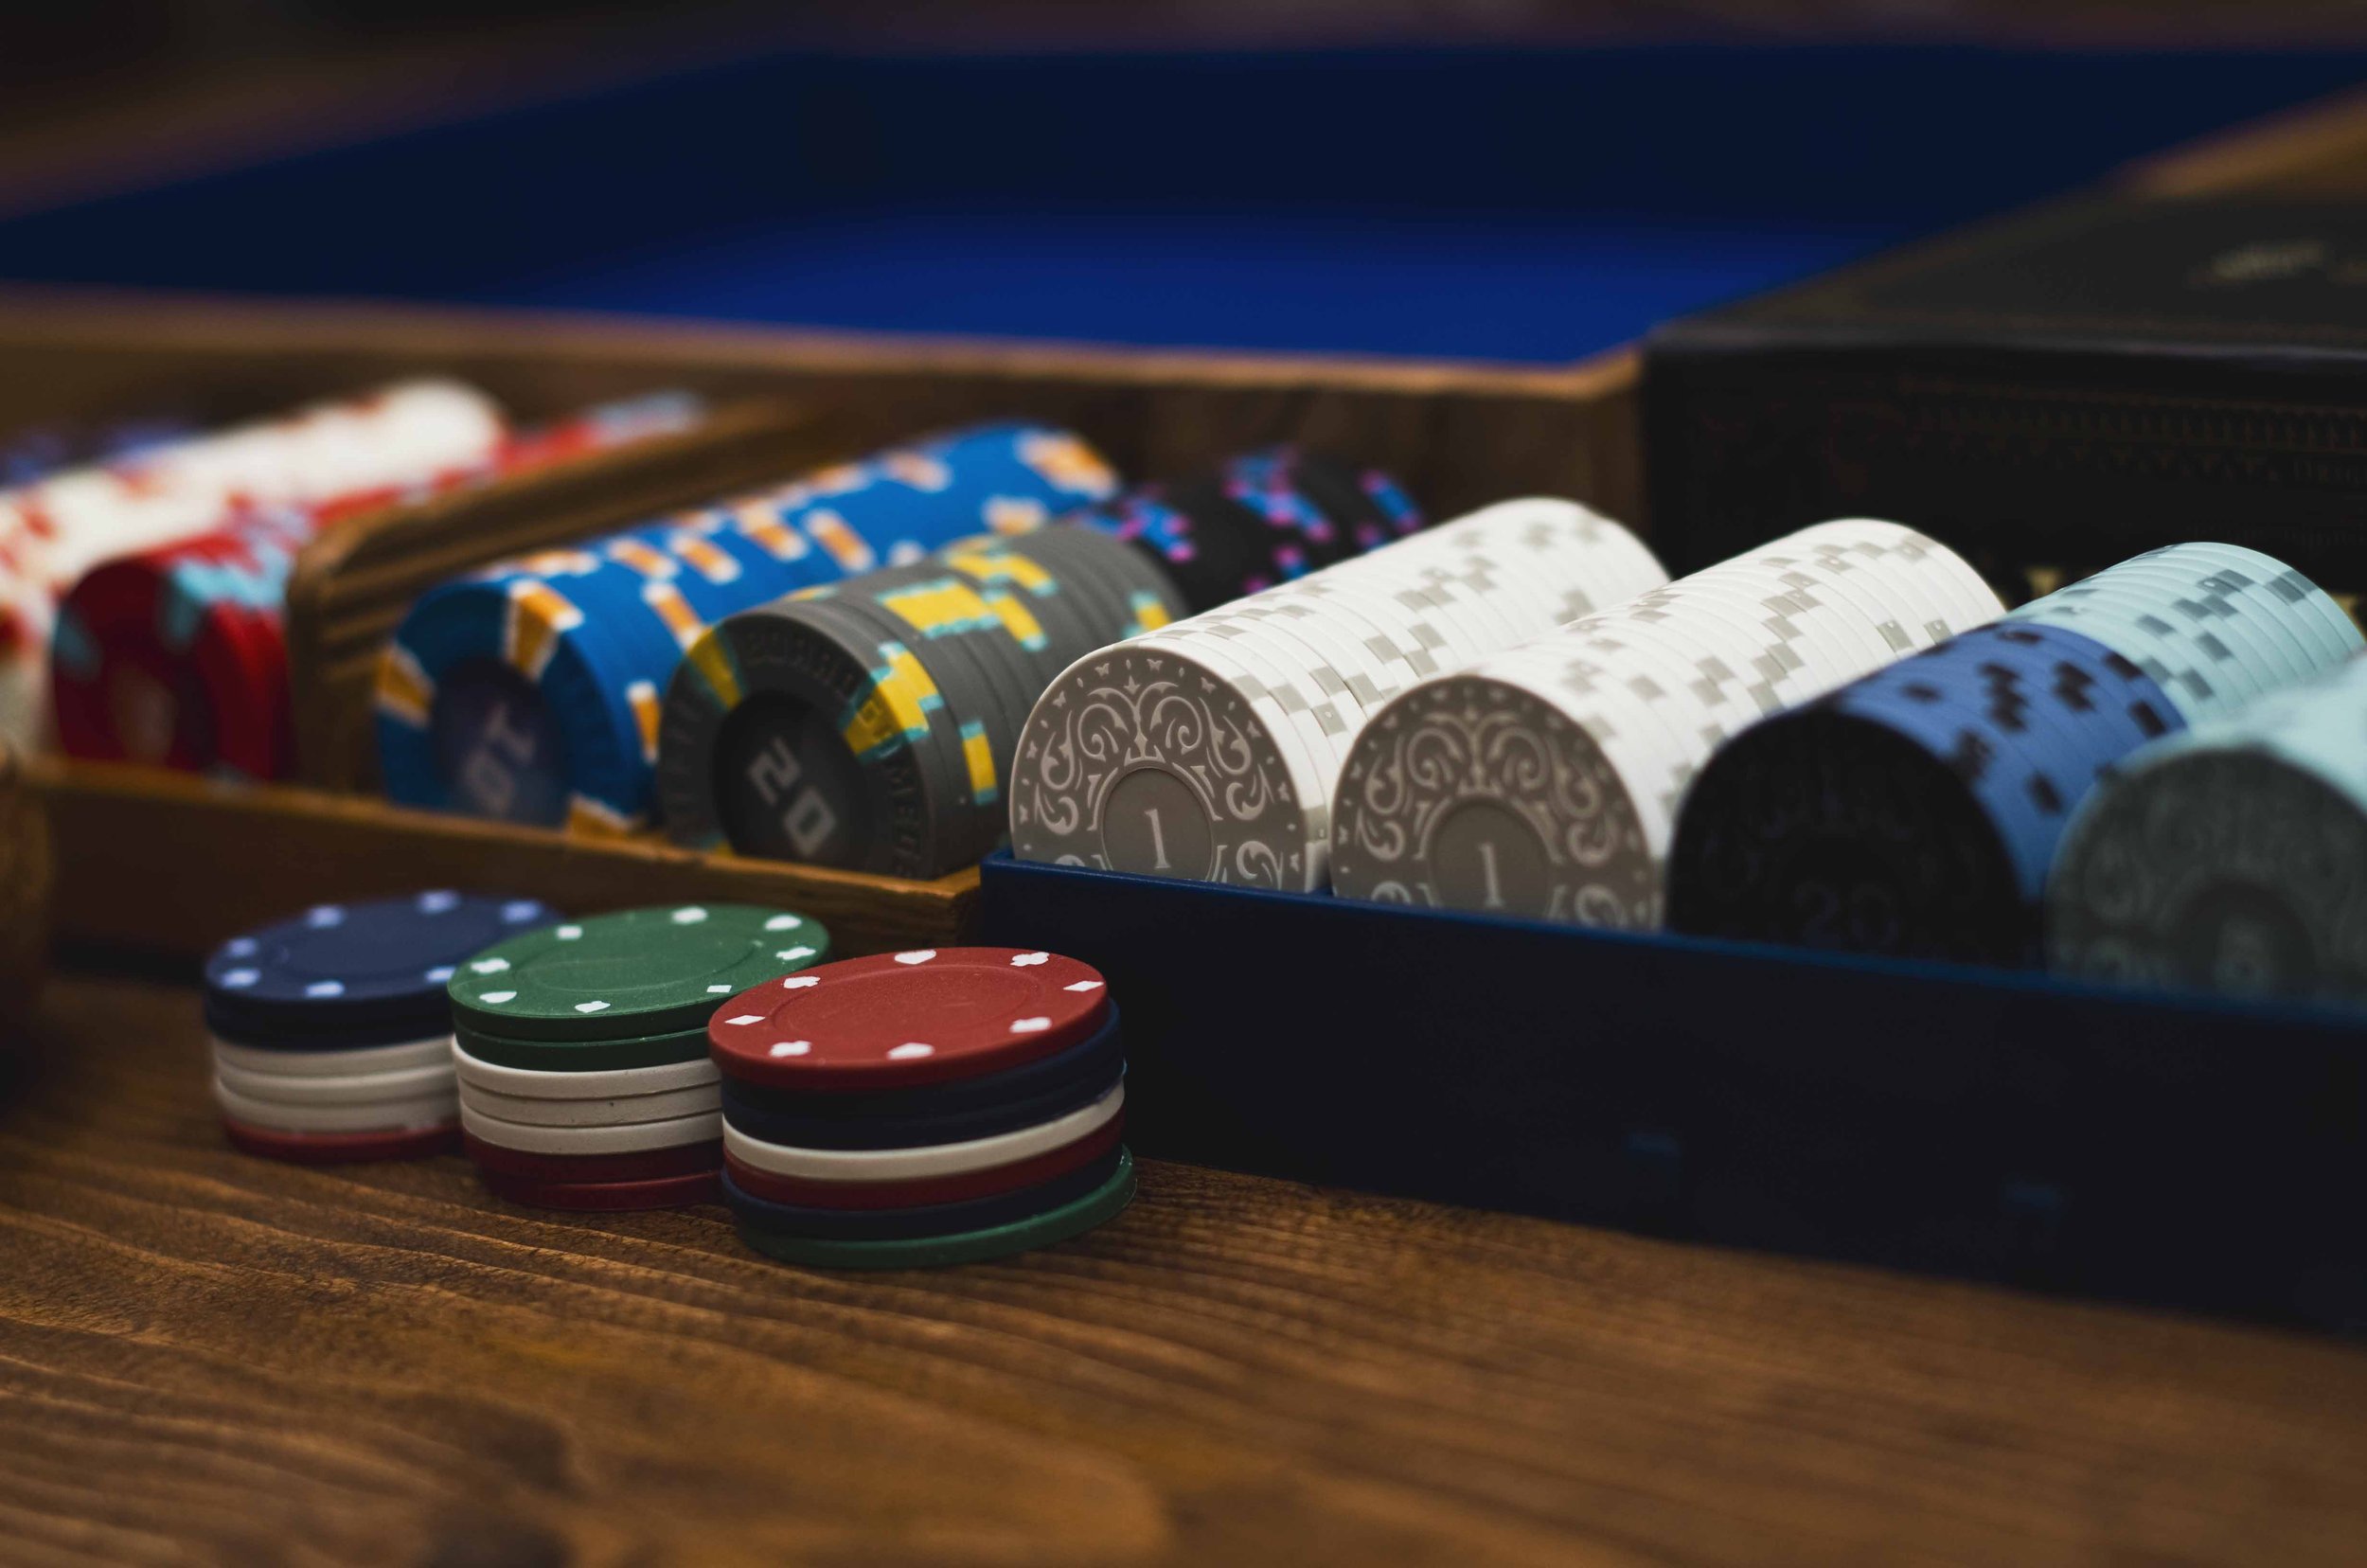 How to count poker chips